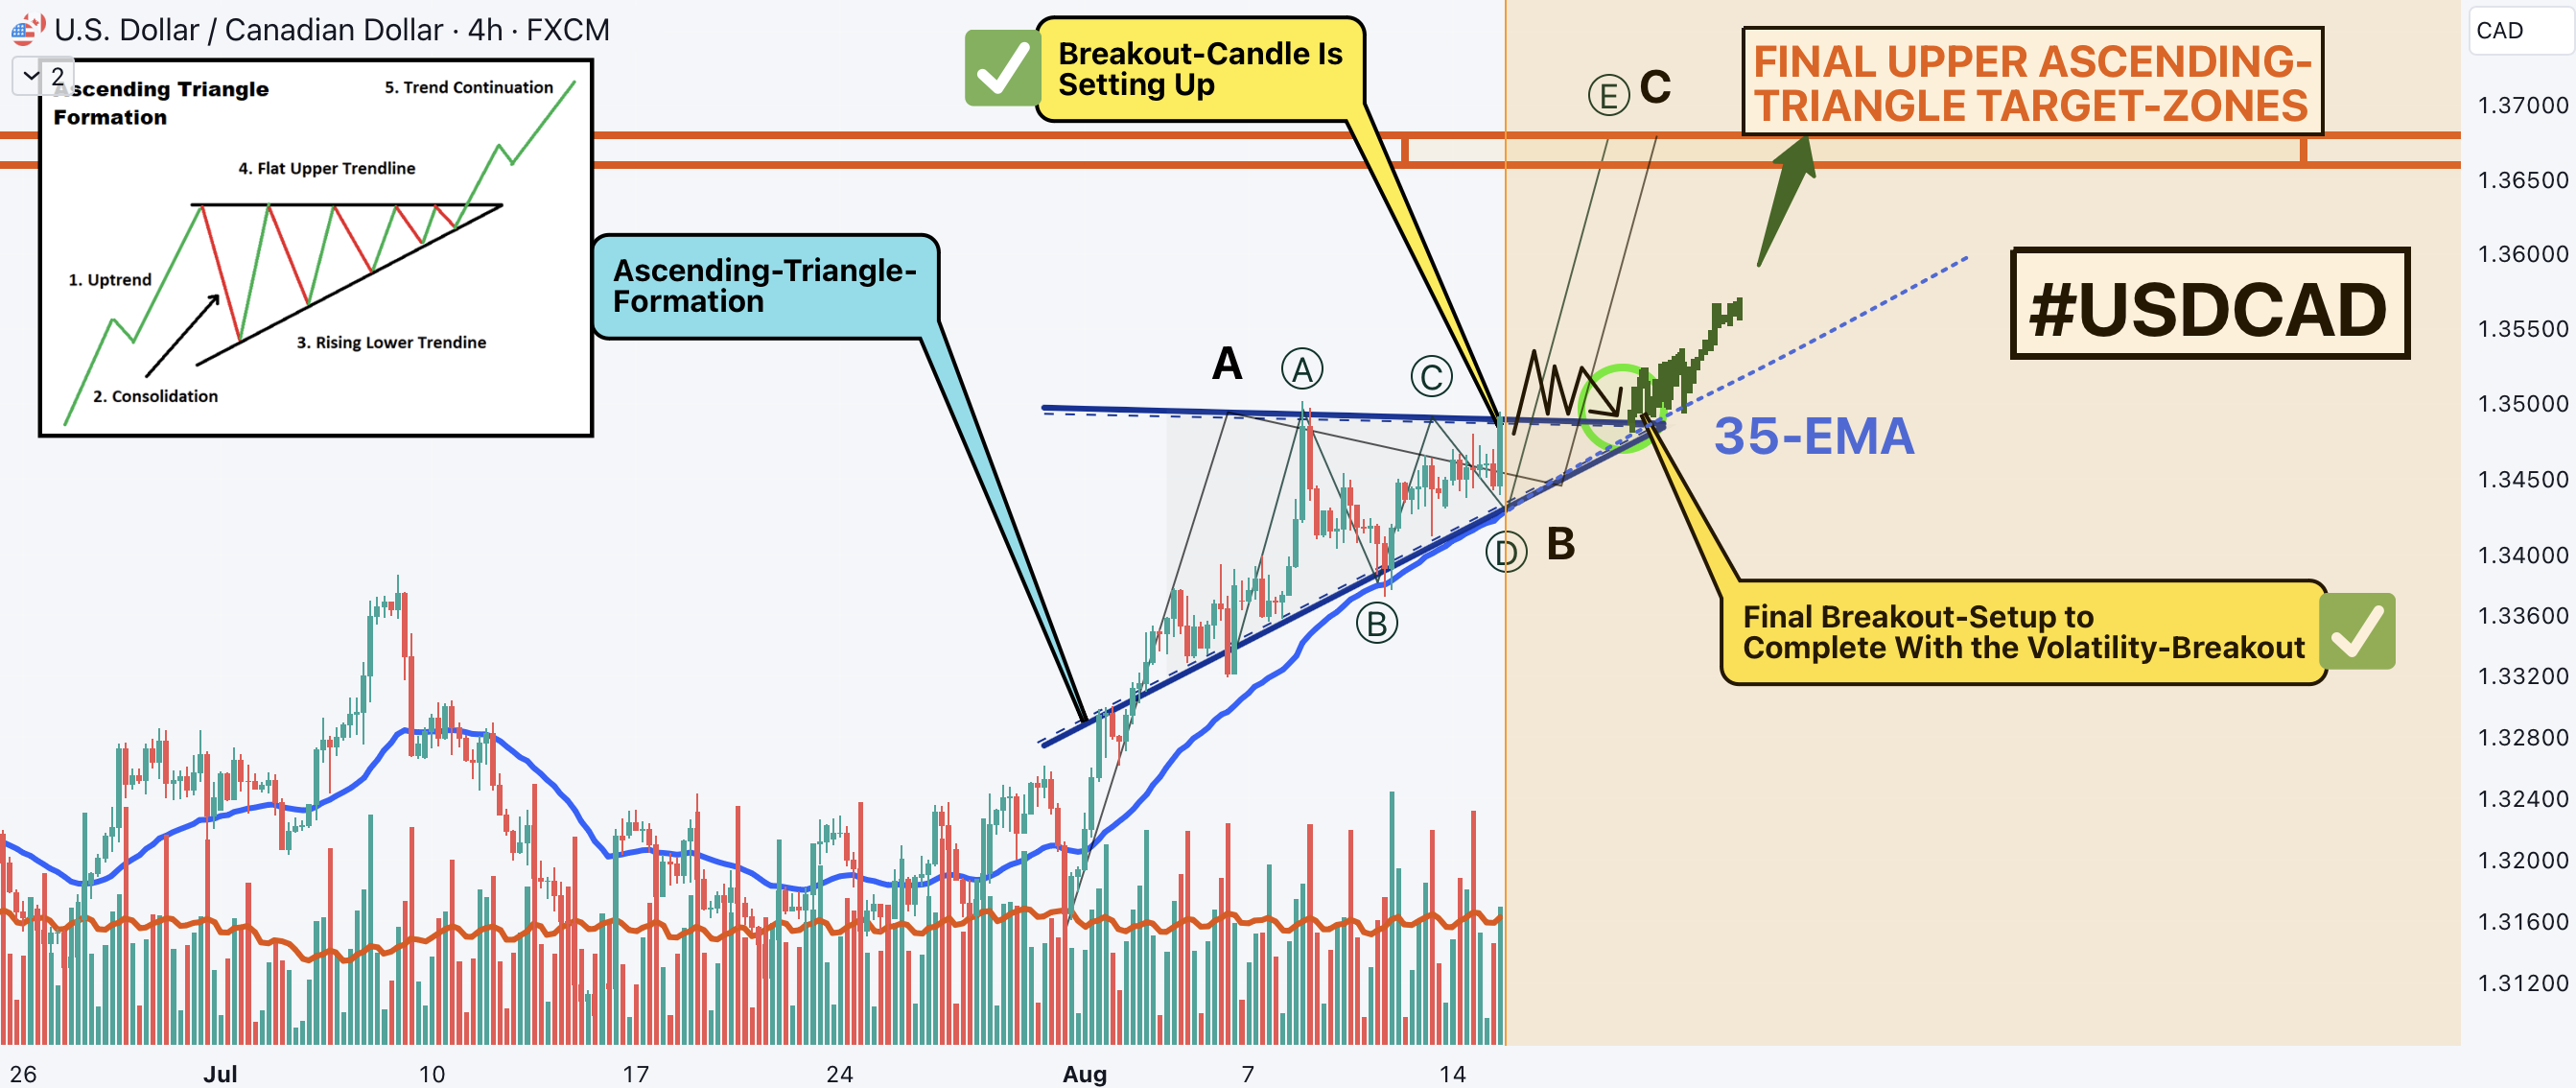 USDCAD, Triangle-Formation, Major Breakout, TARGET-ZONES!